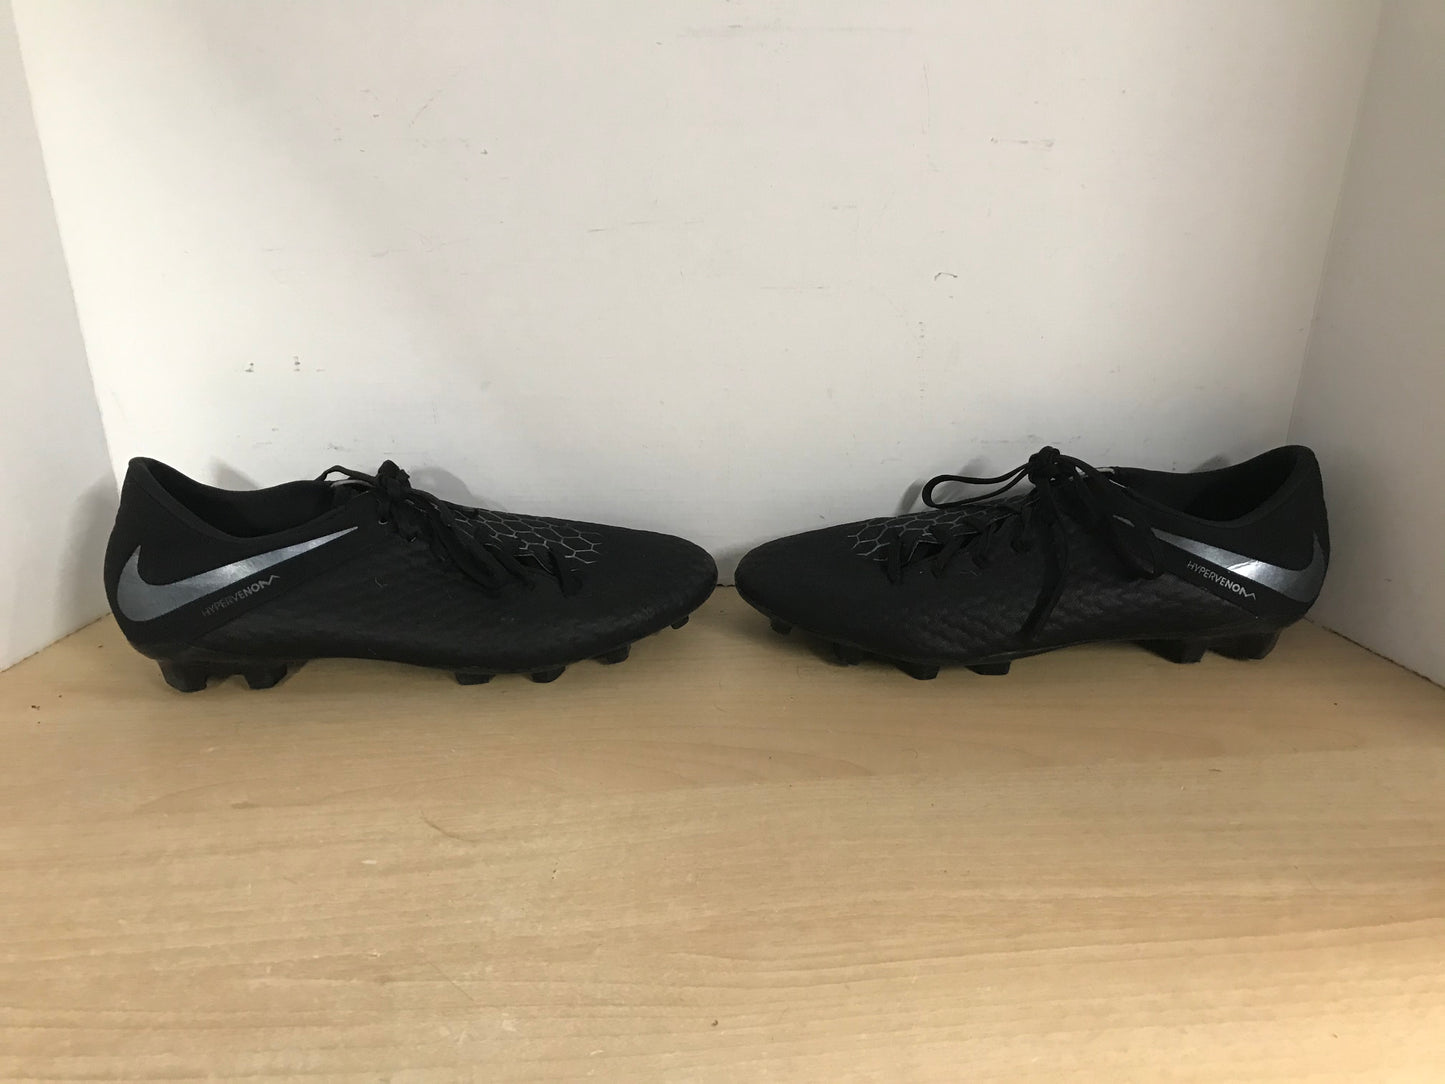 Soccer Shoes Cleats Men's Size 10.5 Nike Skins Black Excellent As New